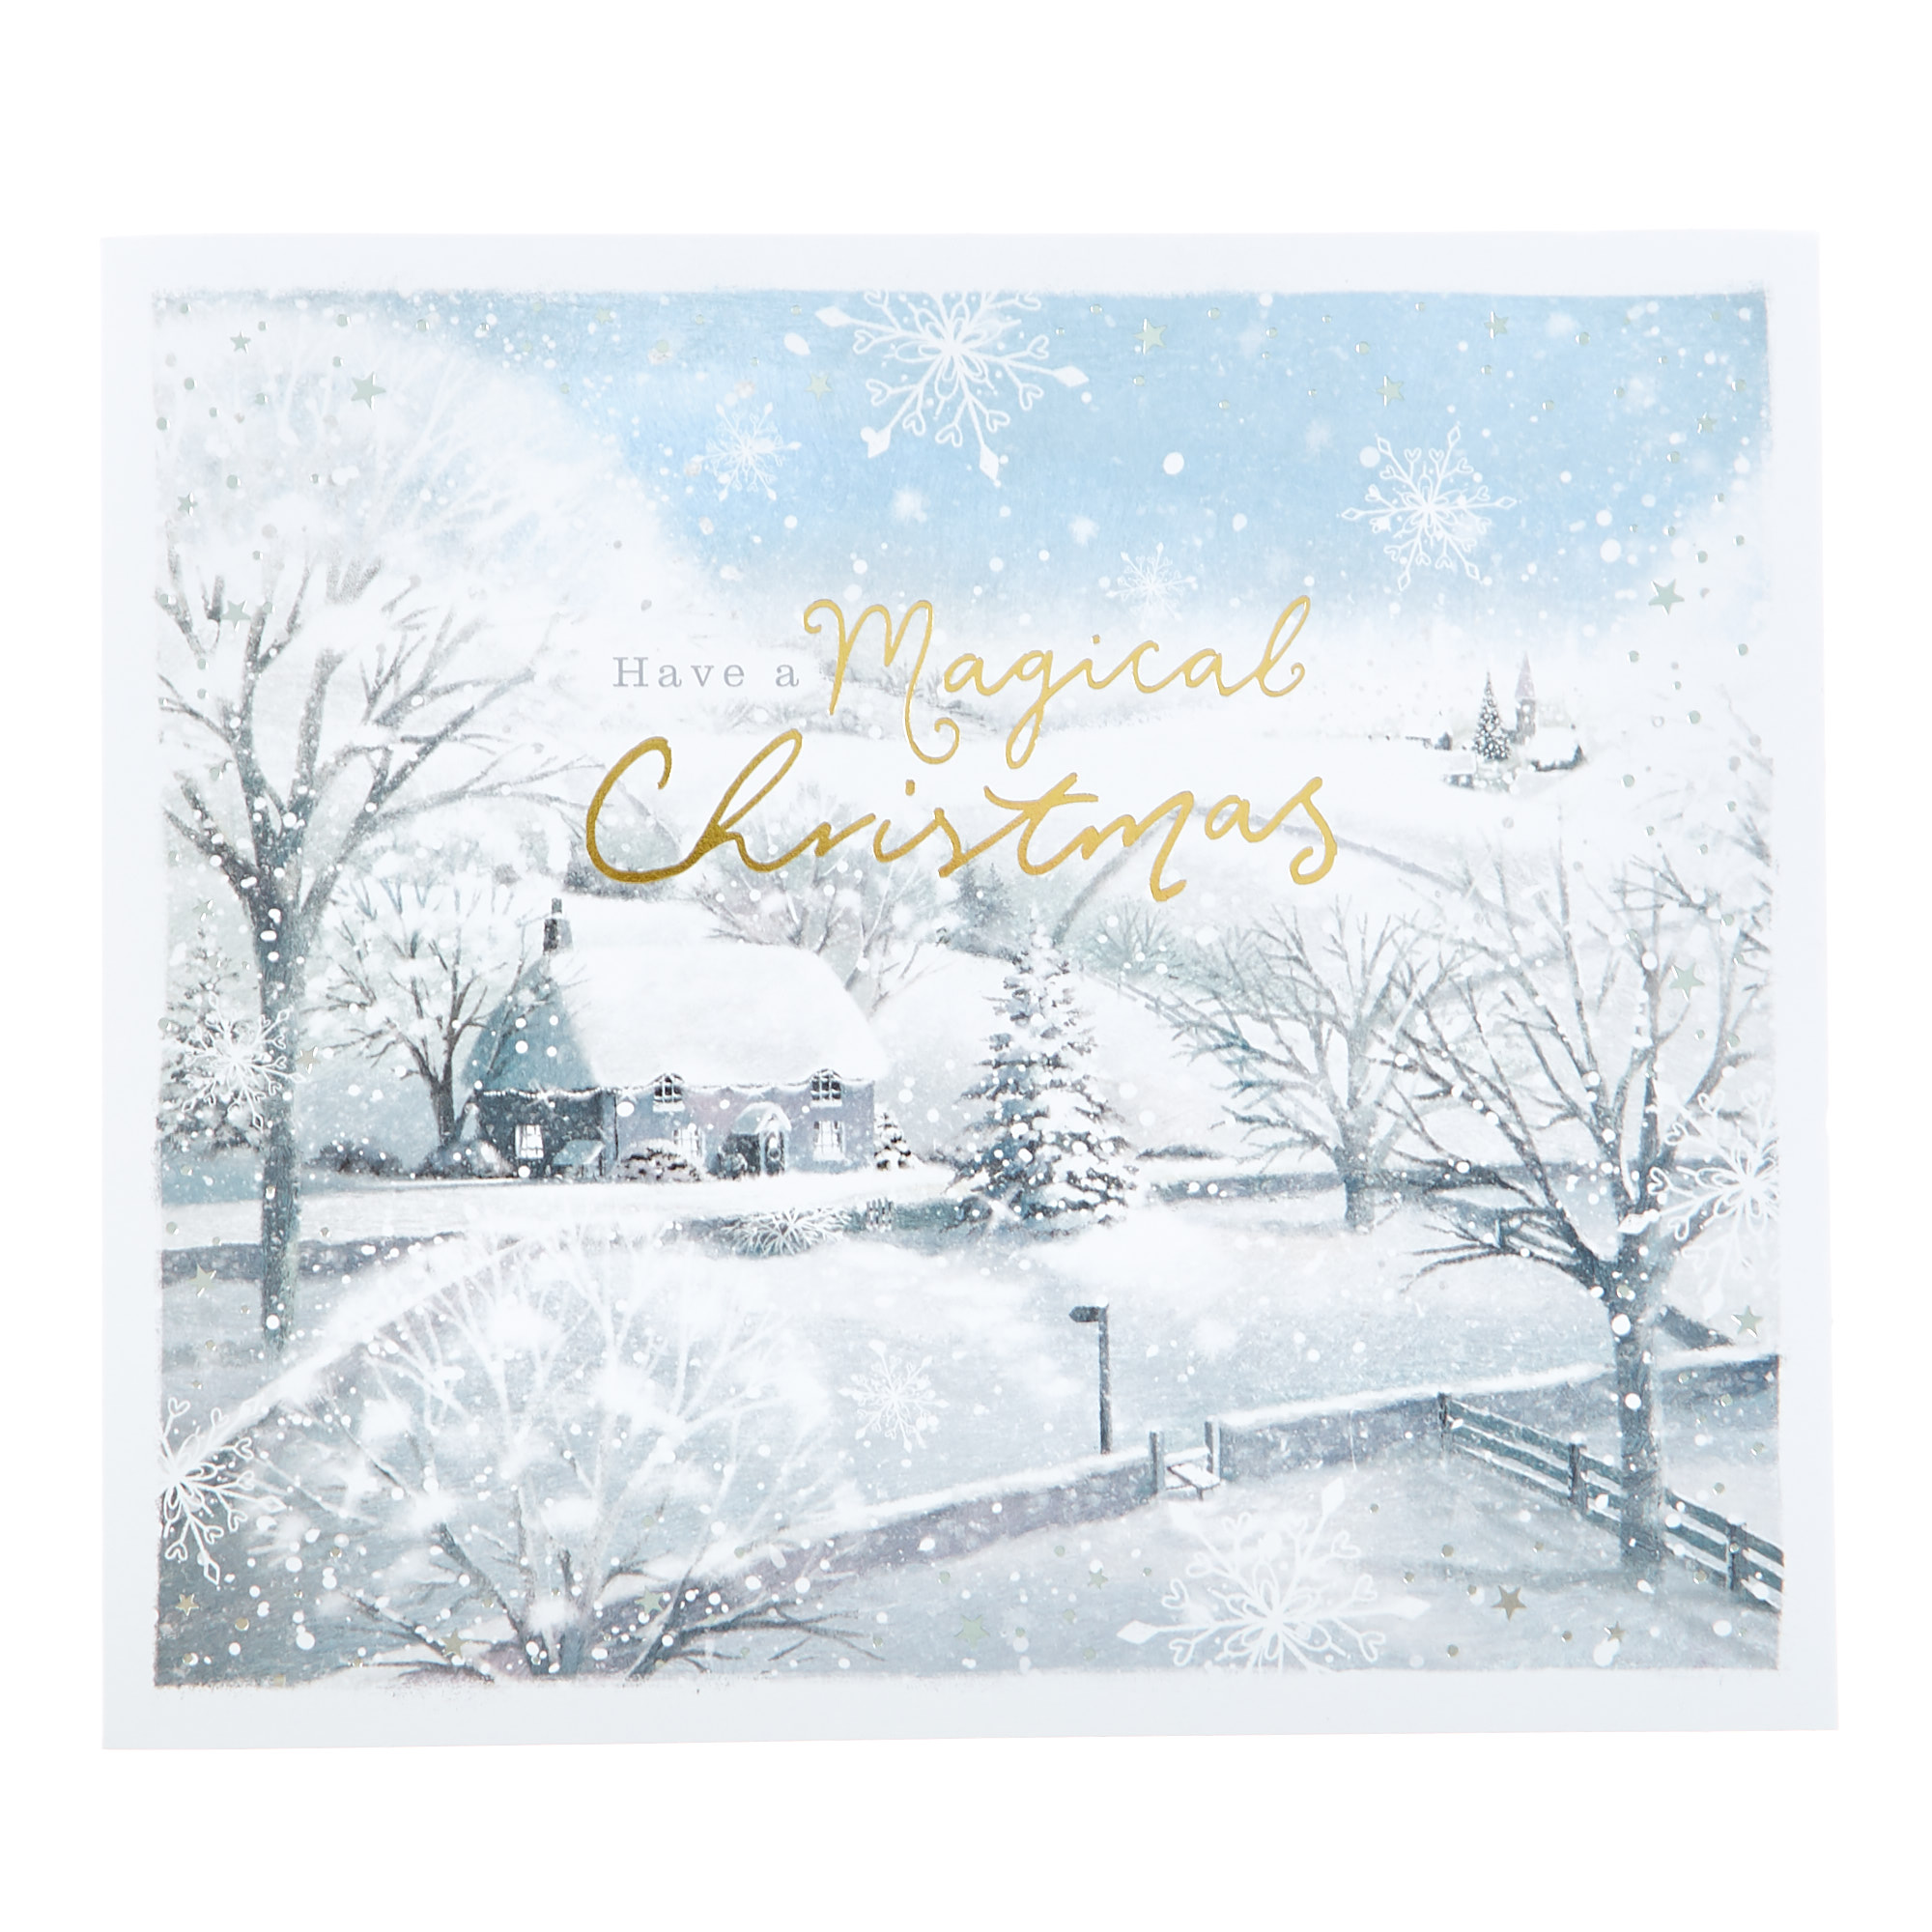 12 Deluxe Charity Boxed Christmas Cards - Magical Winter (2 Designs)